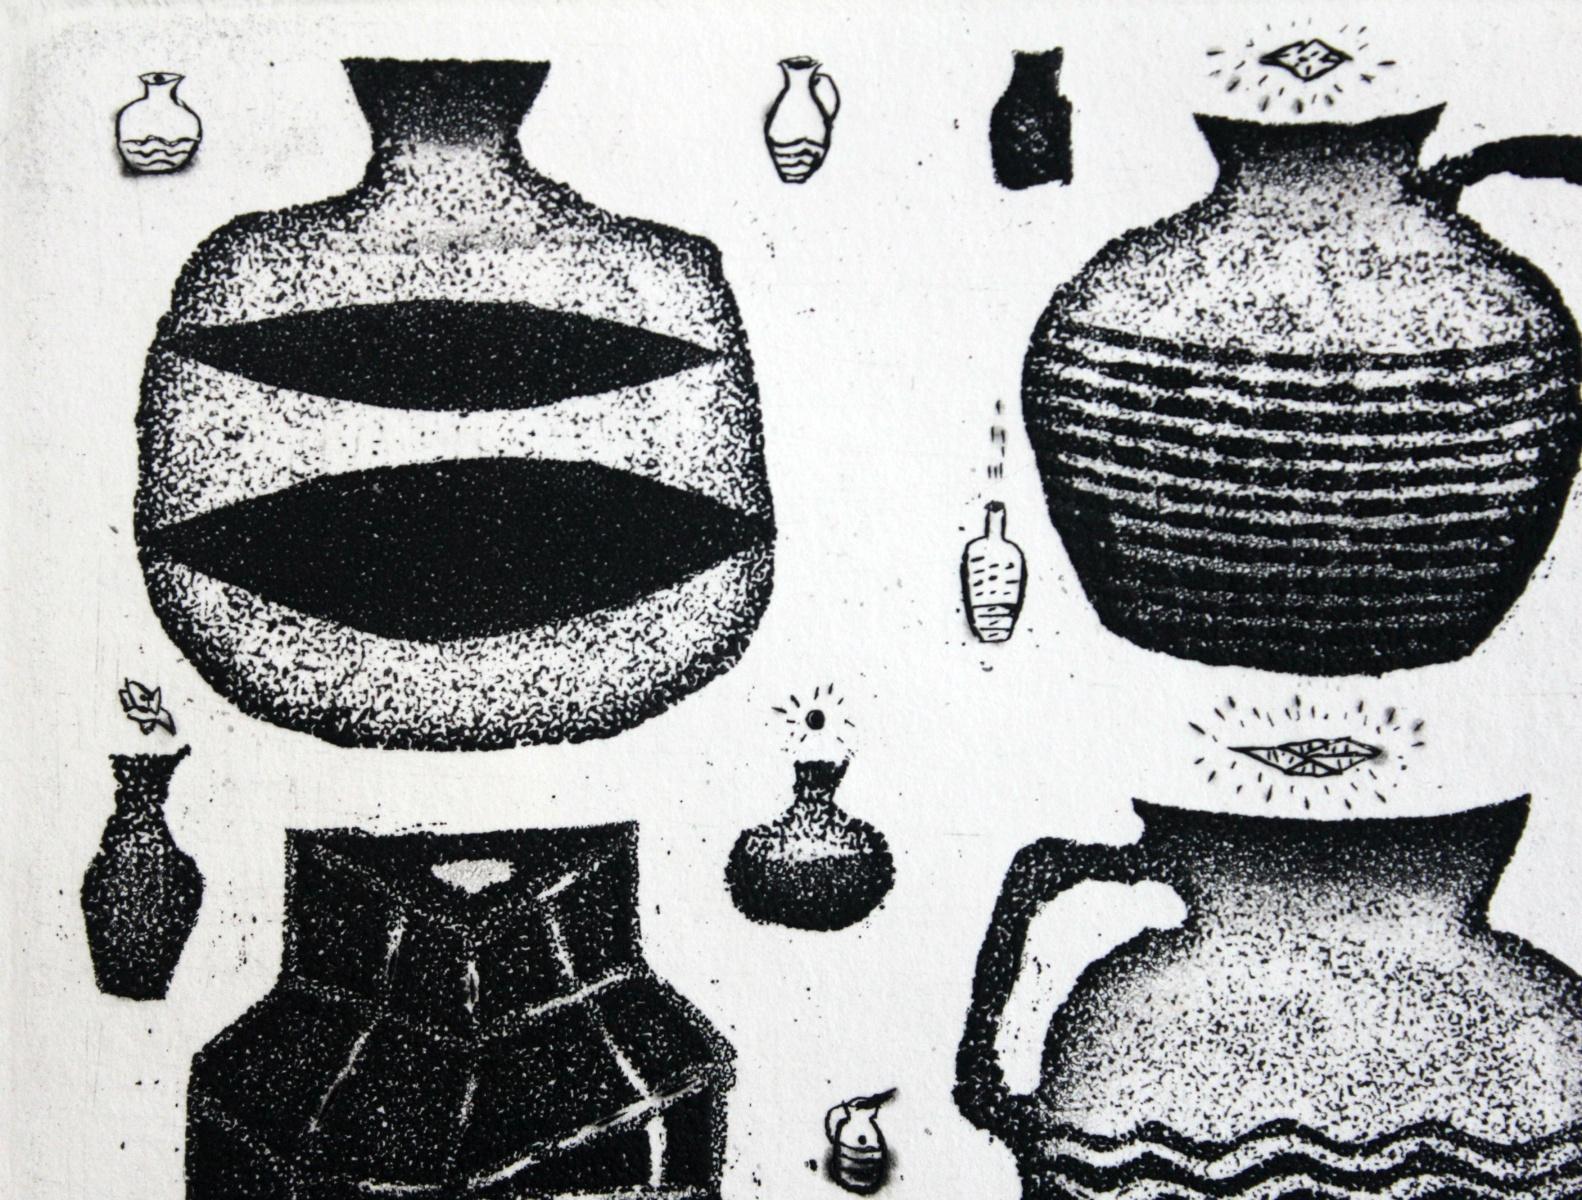 Satiety and thanksgiving of clay pots - XXI century, Black and white etching - Print by Jerzy Dmitruk